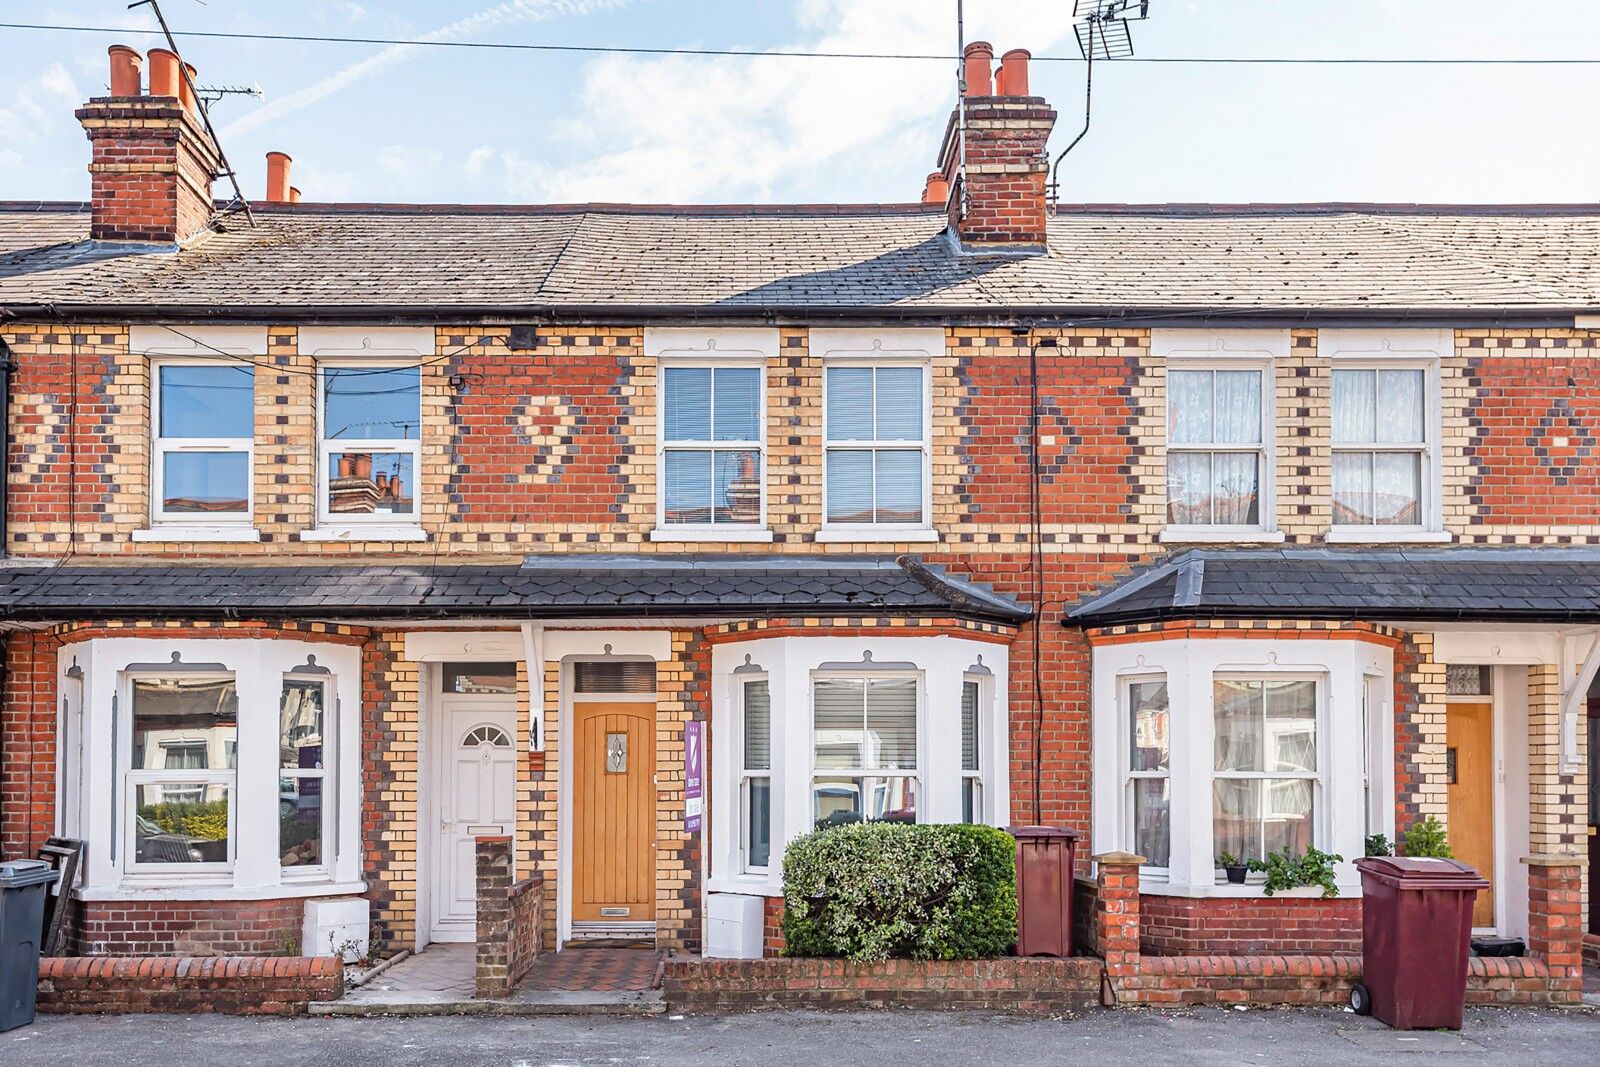 3 bedroom mid terraced house for sale Curzon Street, Reading, RG30, main image